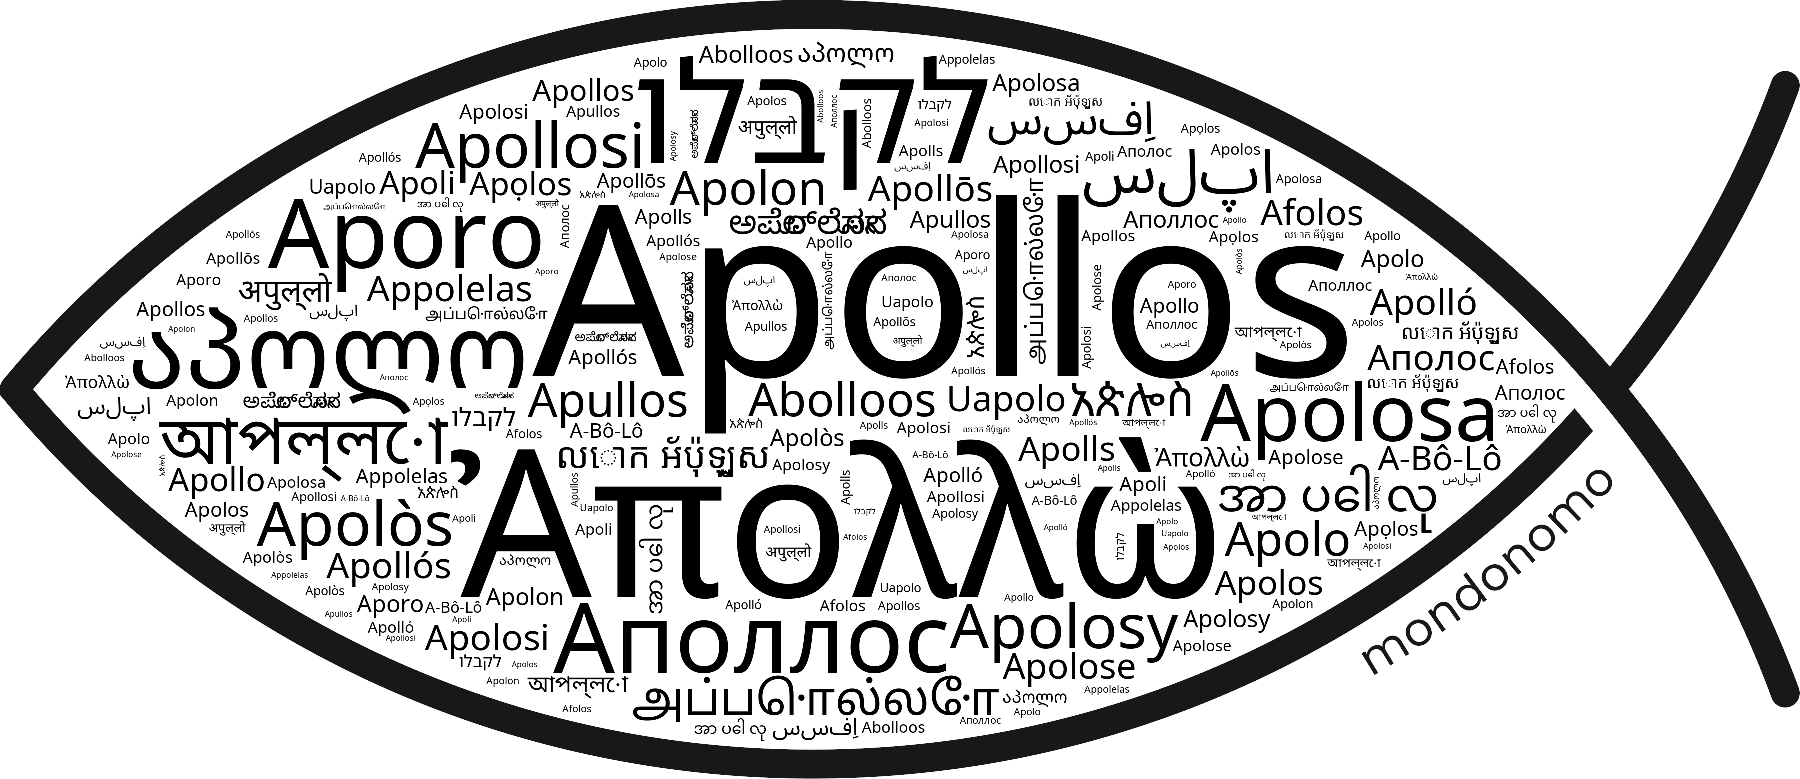 Name Apollos in the world's Bibles